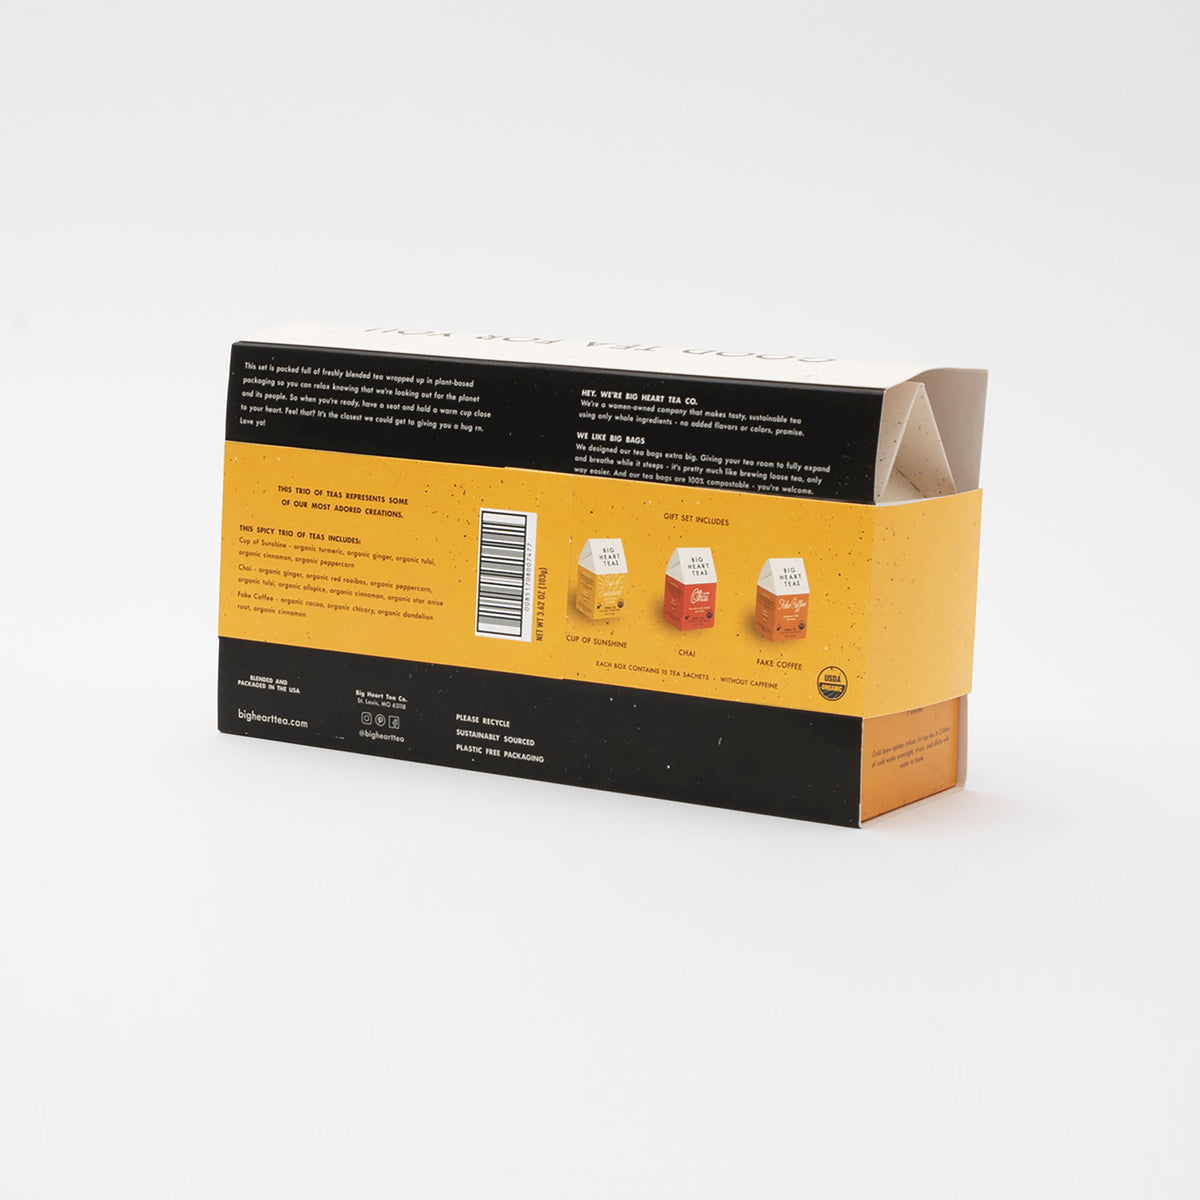 The Spices Tea Bags Gift Set